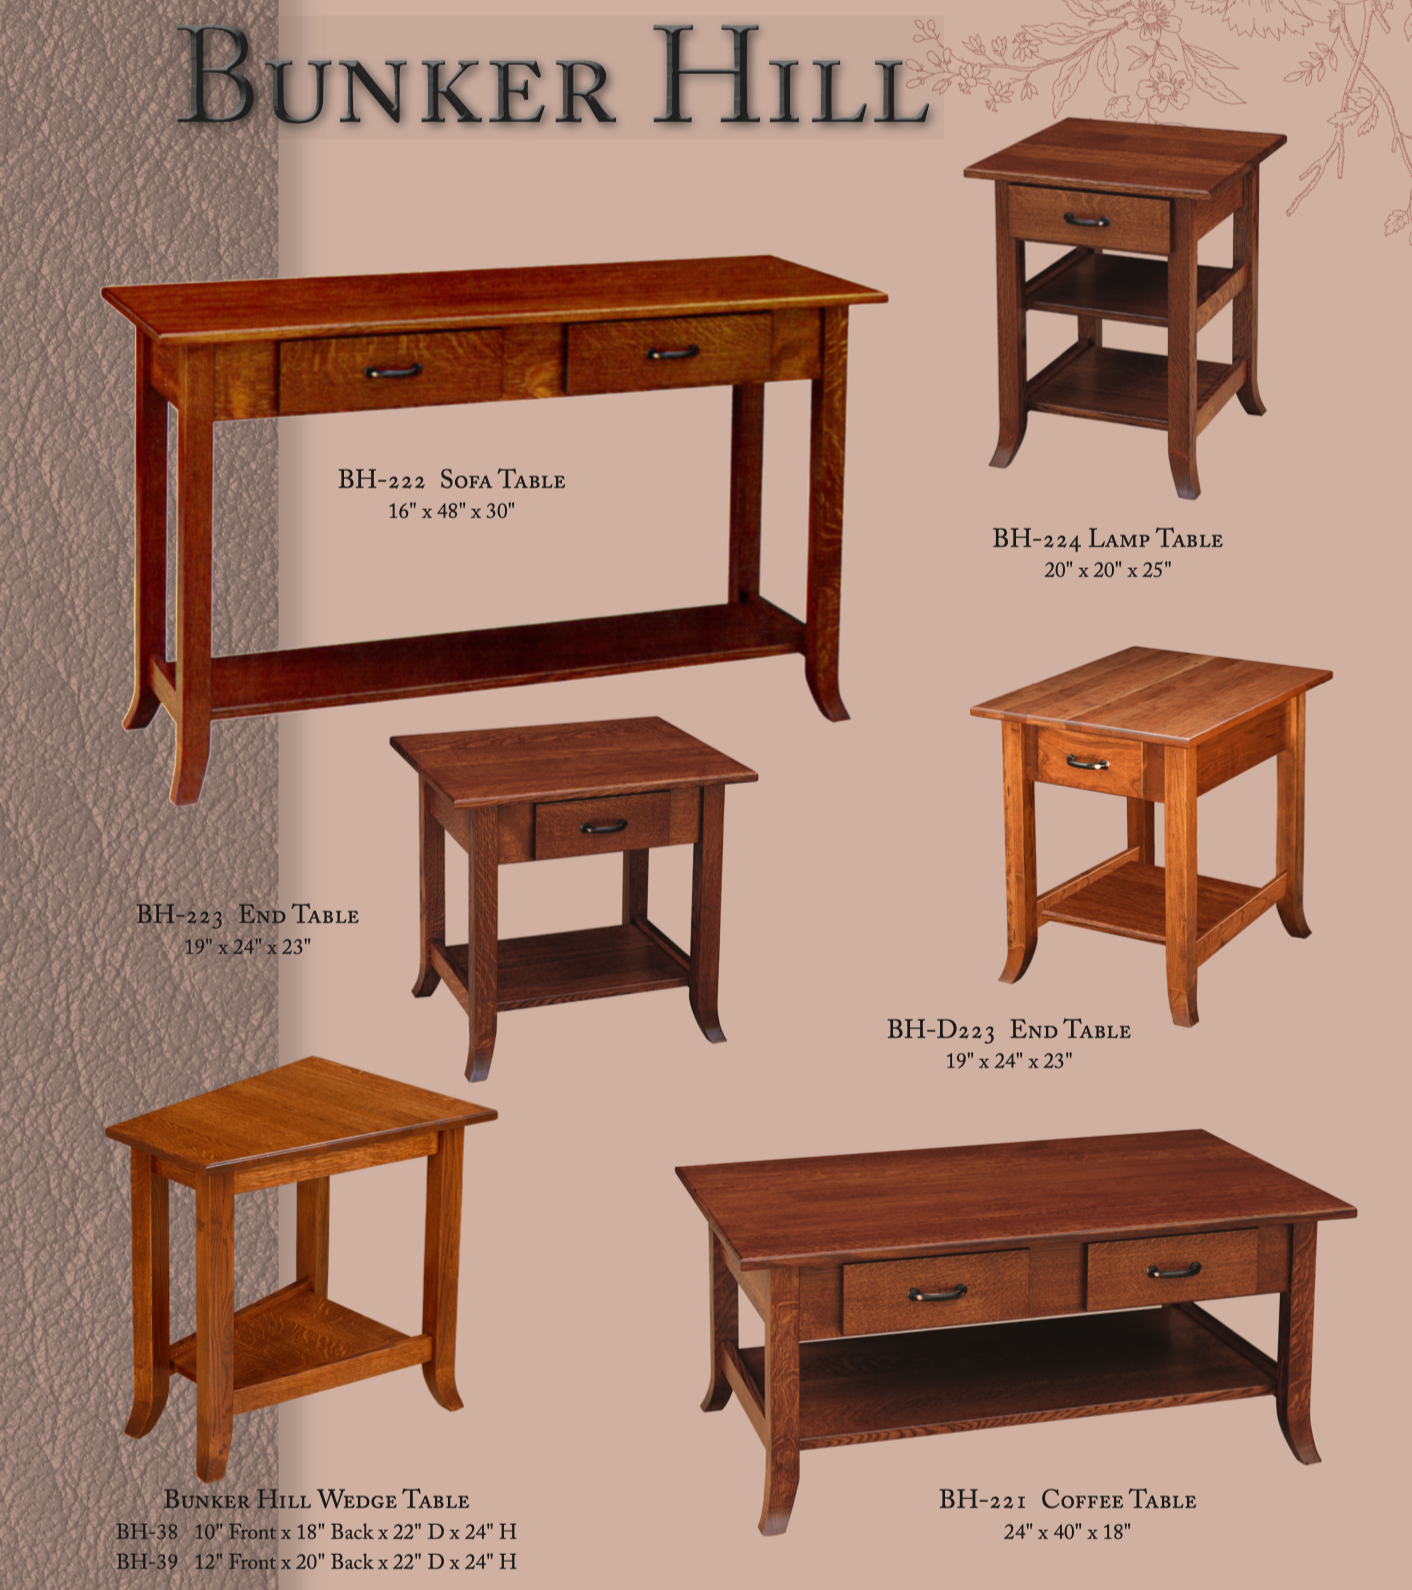 Bunker Hill 19" x 24" End Table